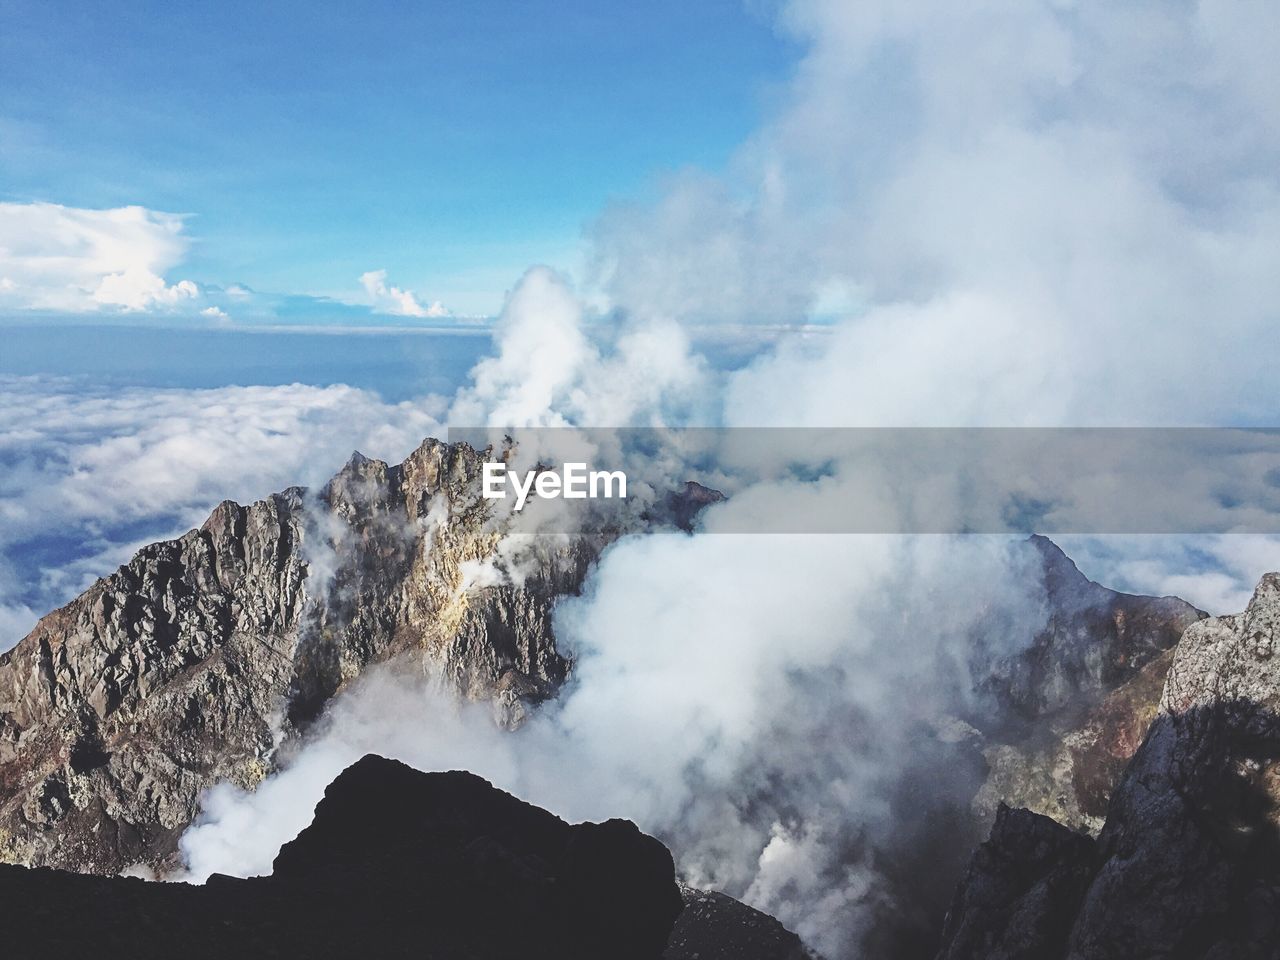 High angle view of smoke emitting from mountain against sea and cloudy sky